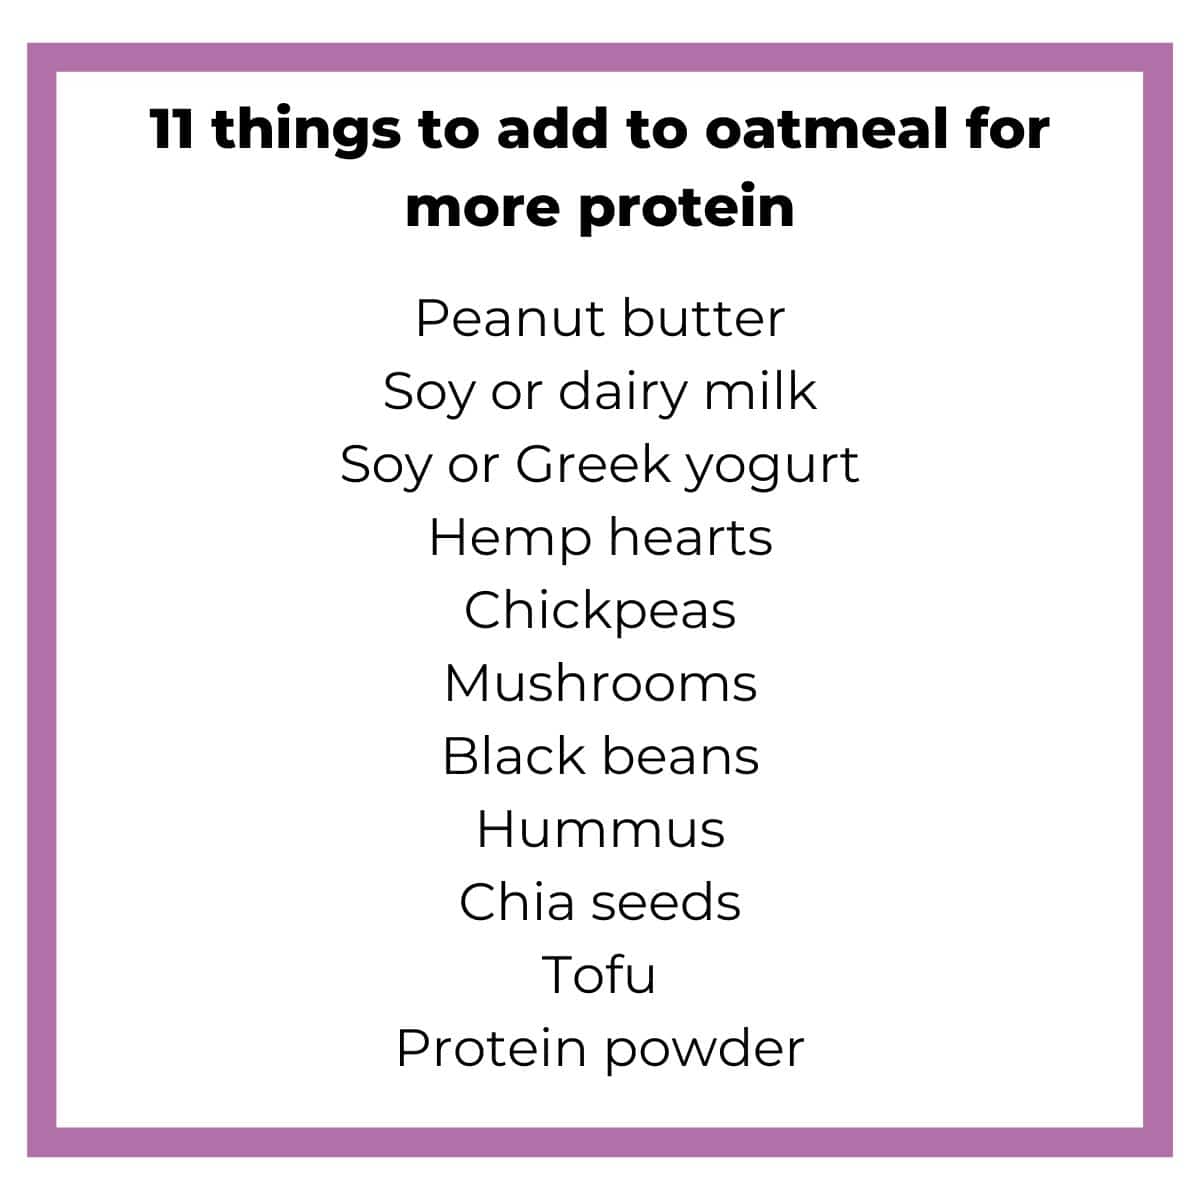 list of 11 things to add to oatmeal for more protein.